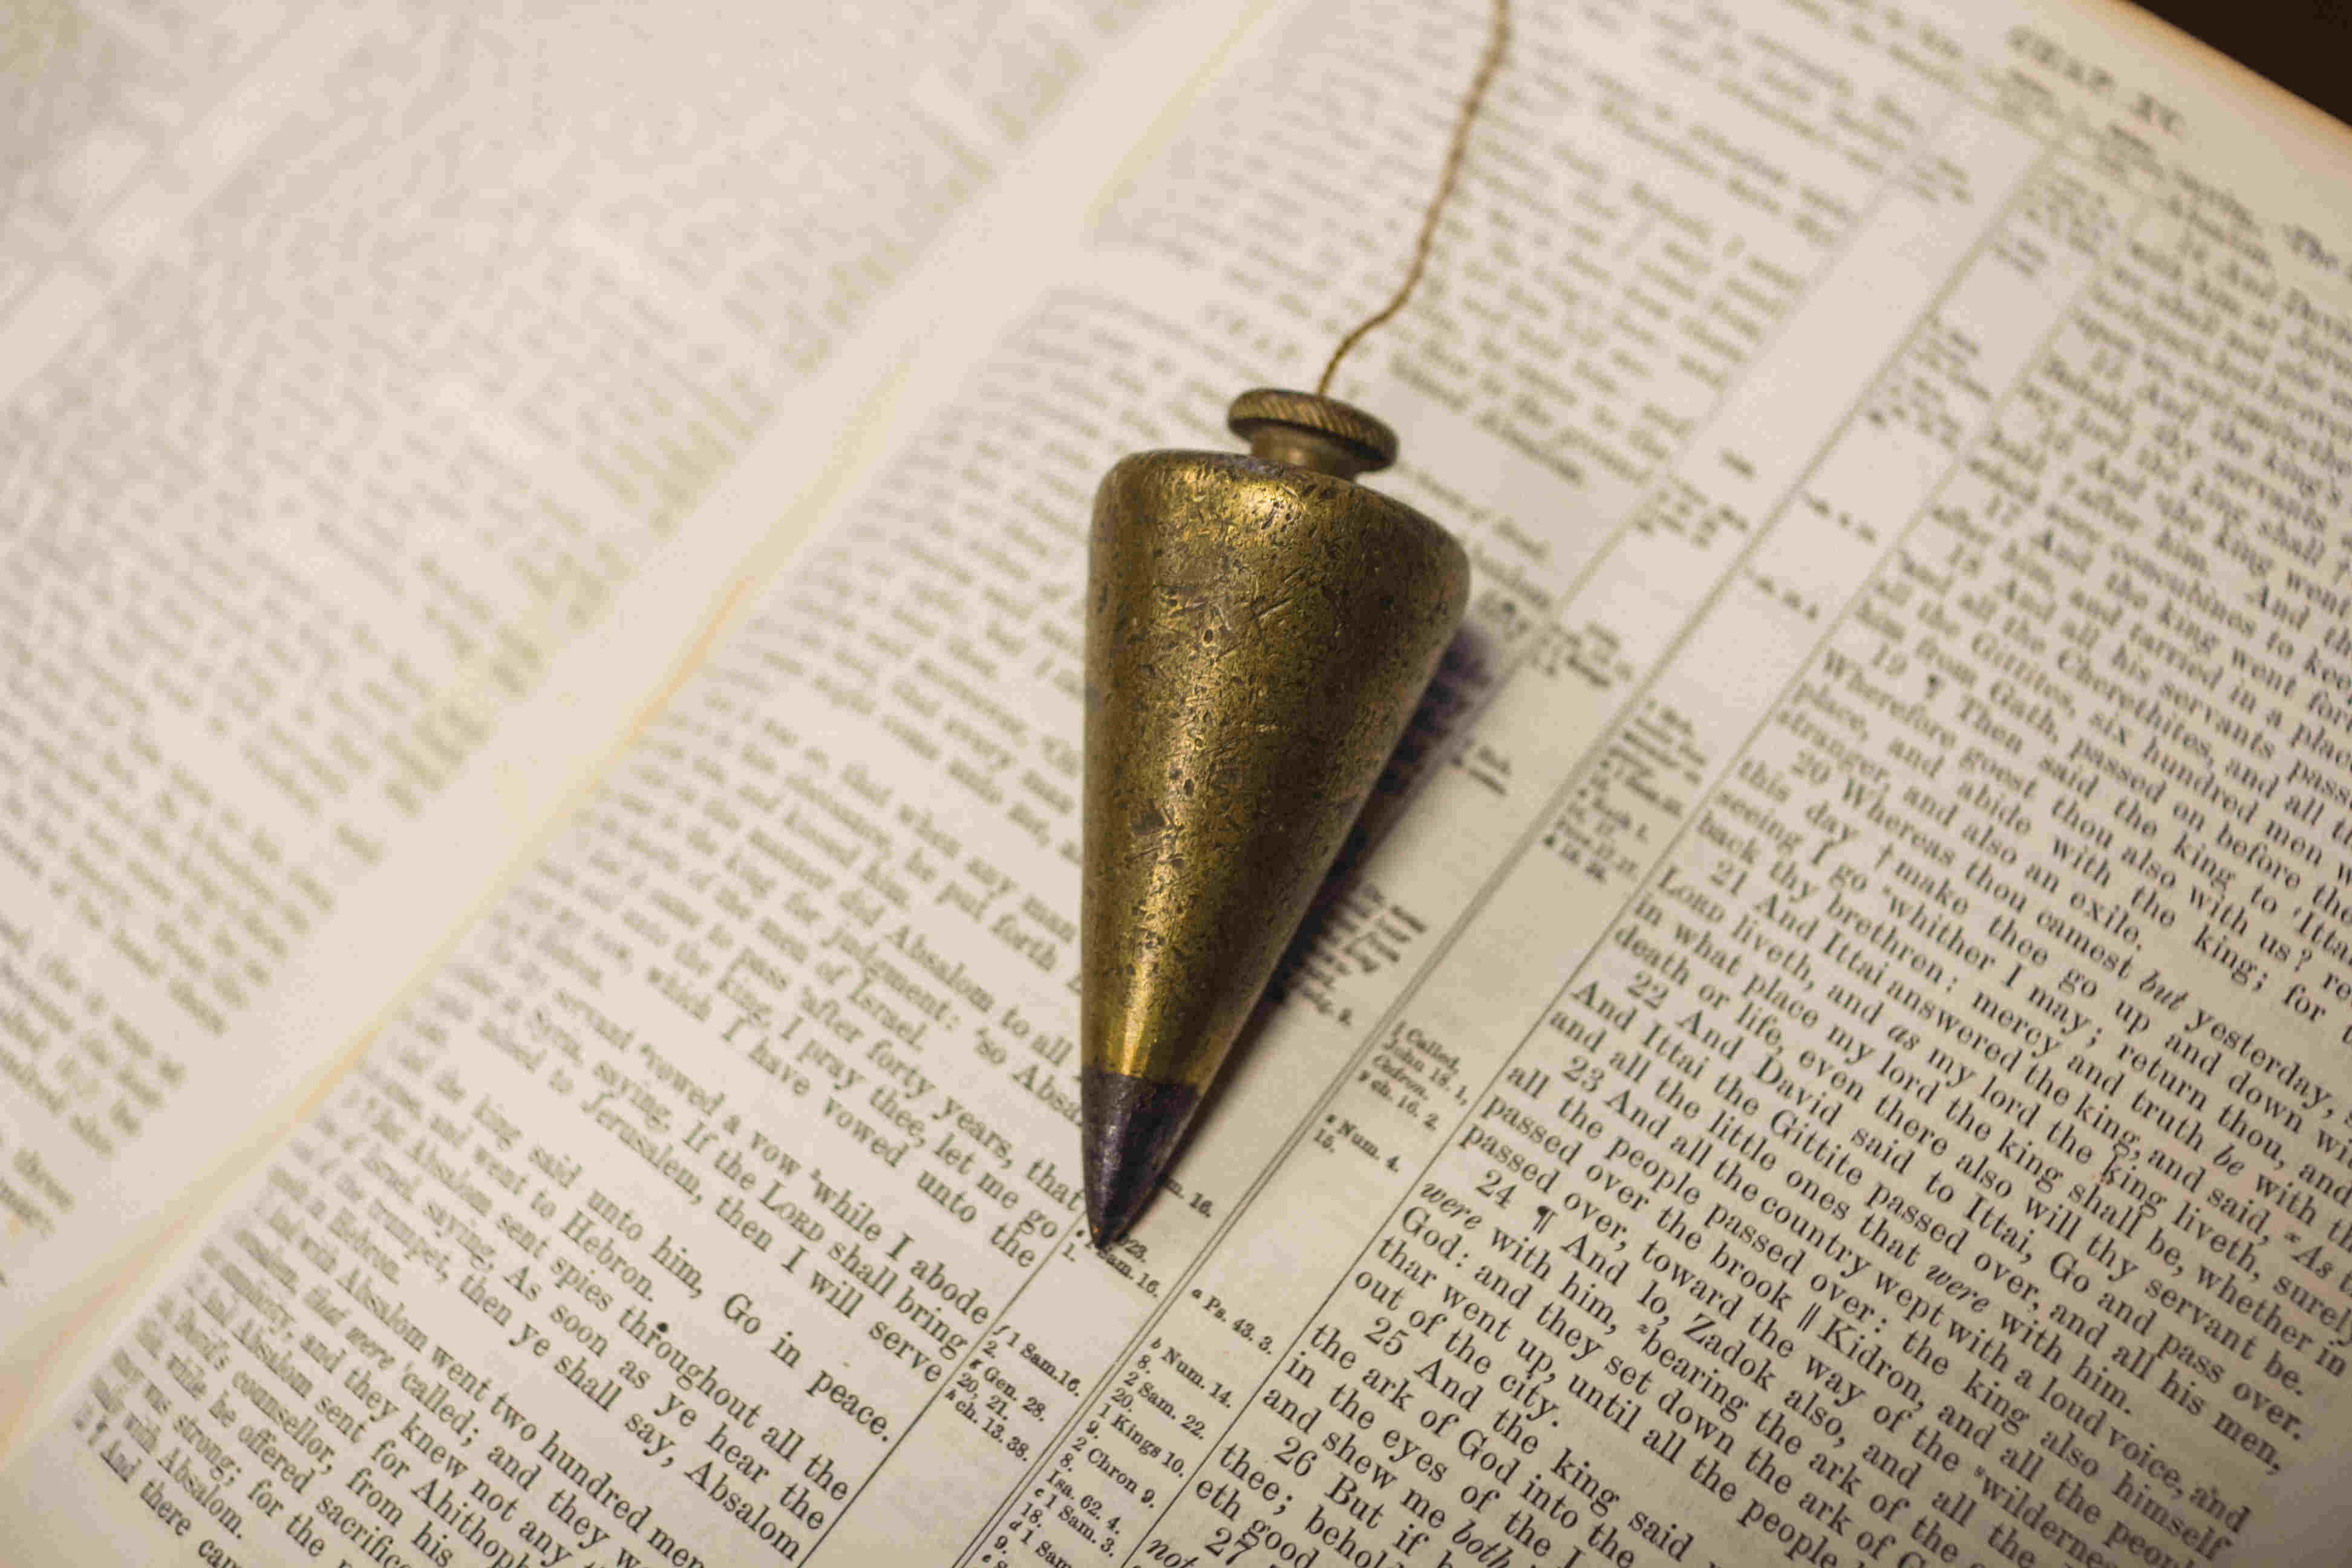 Who In The Bible Carried A Plumb Bob